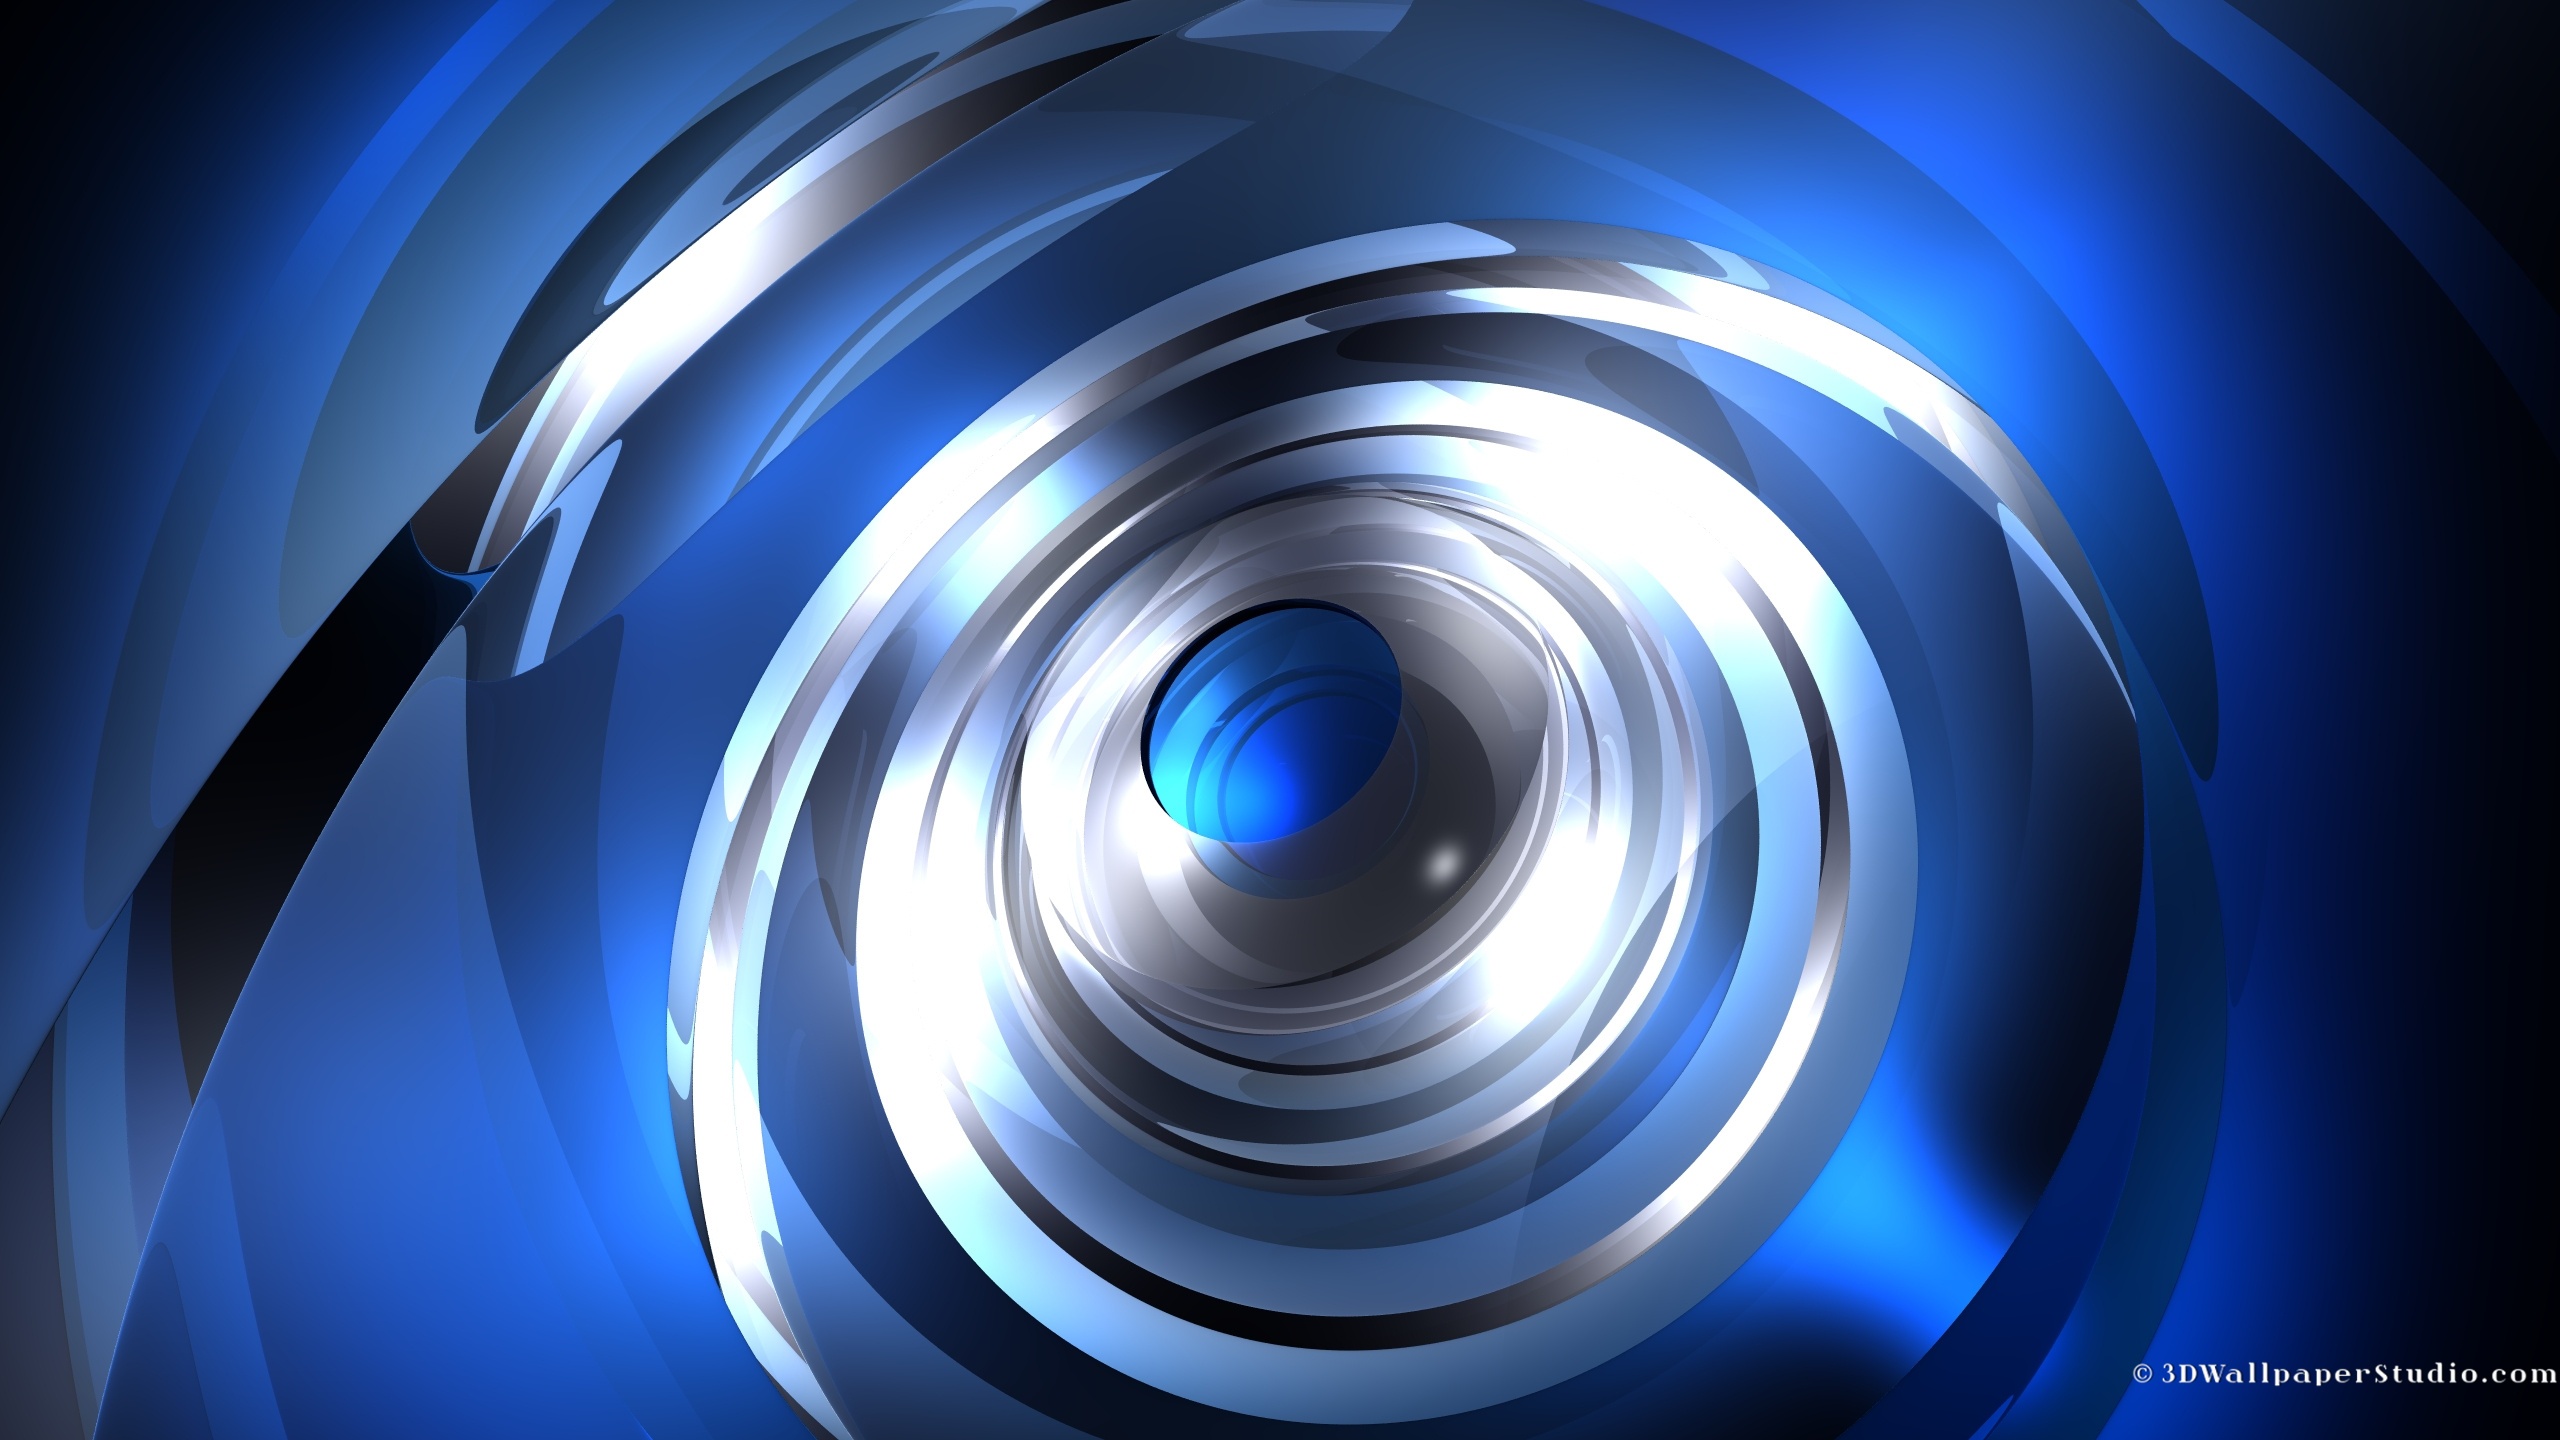 Moving blue 3d abstract wallpapers 2560x1440